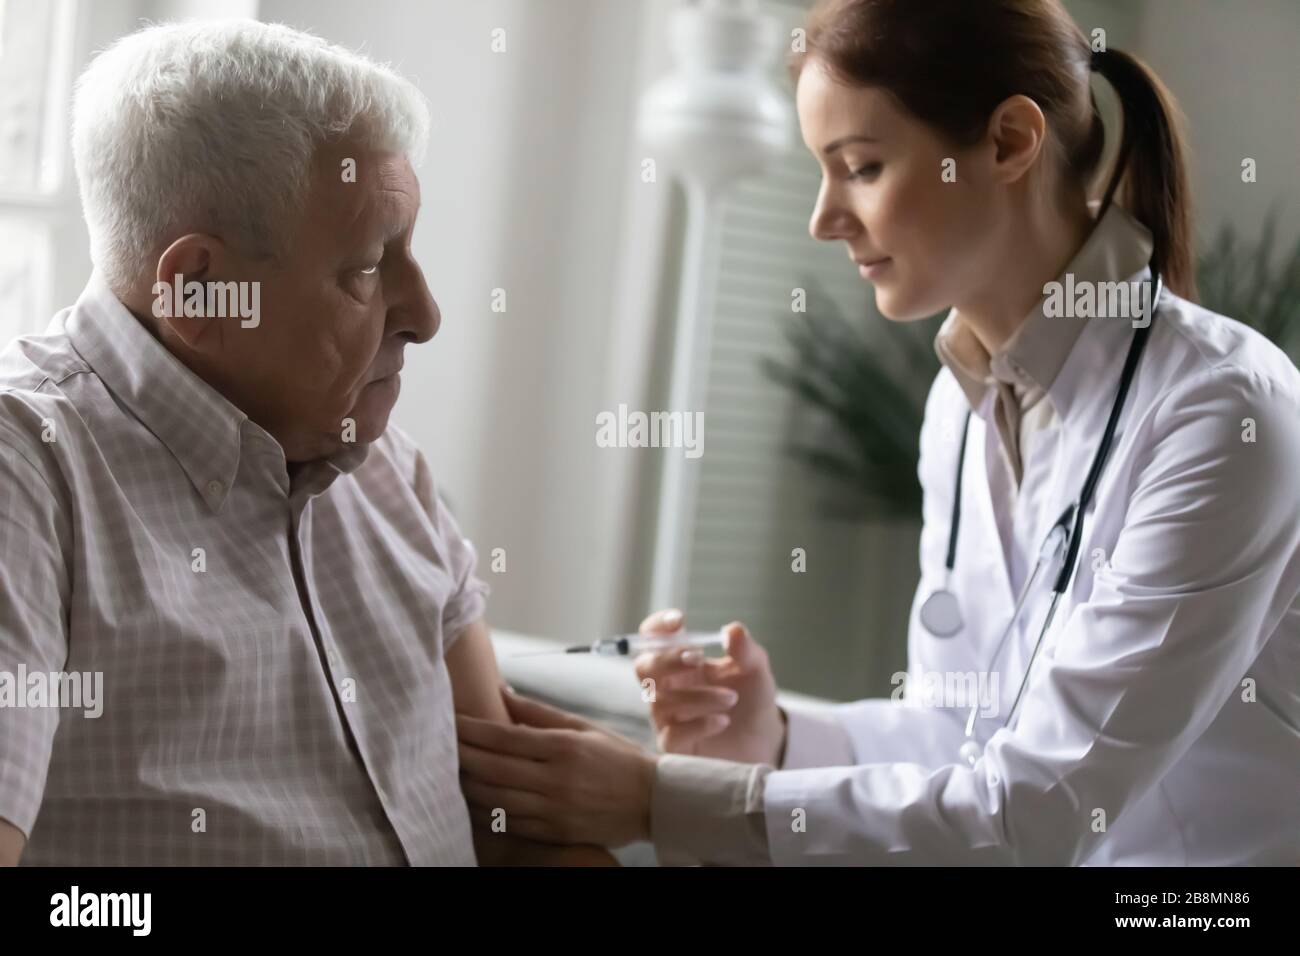 Nurse holding syringe makes an injection to elderly patient Stock Photo